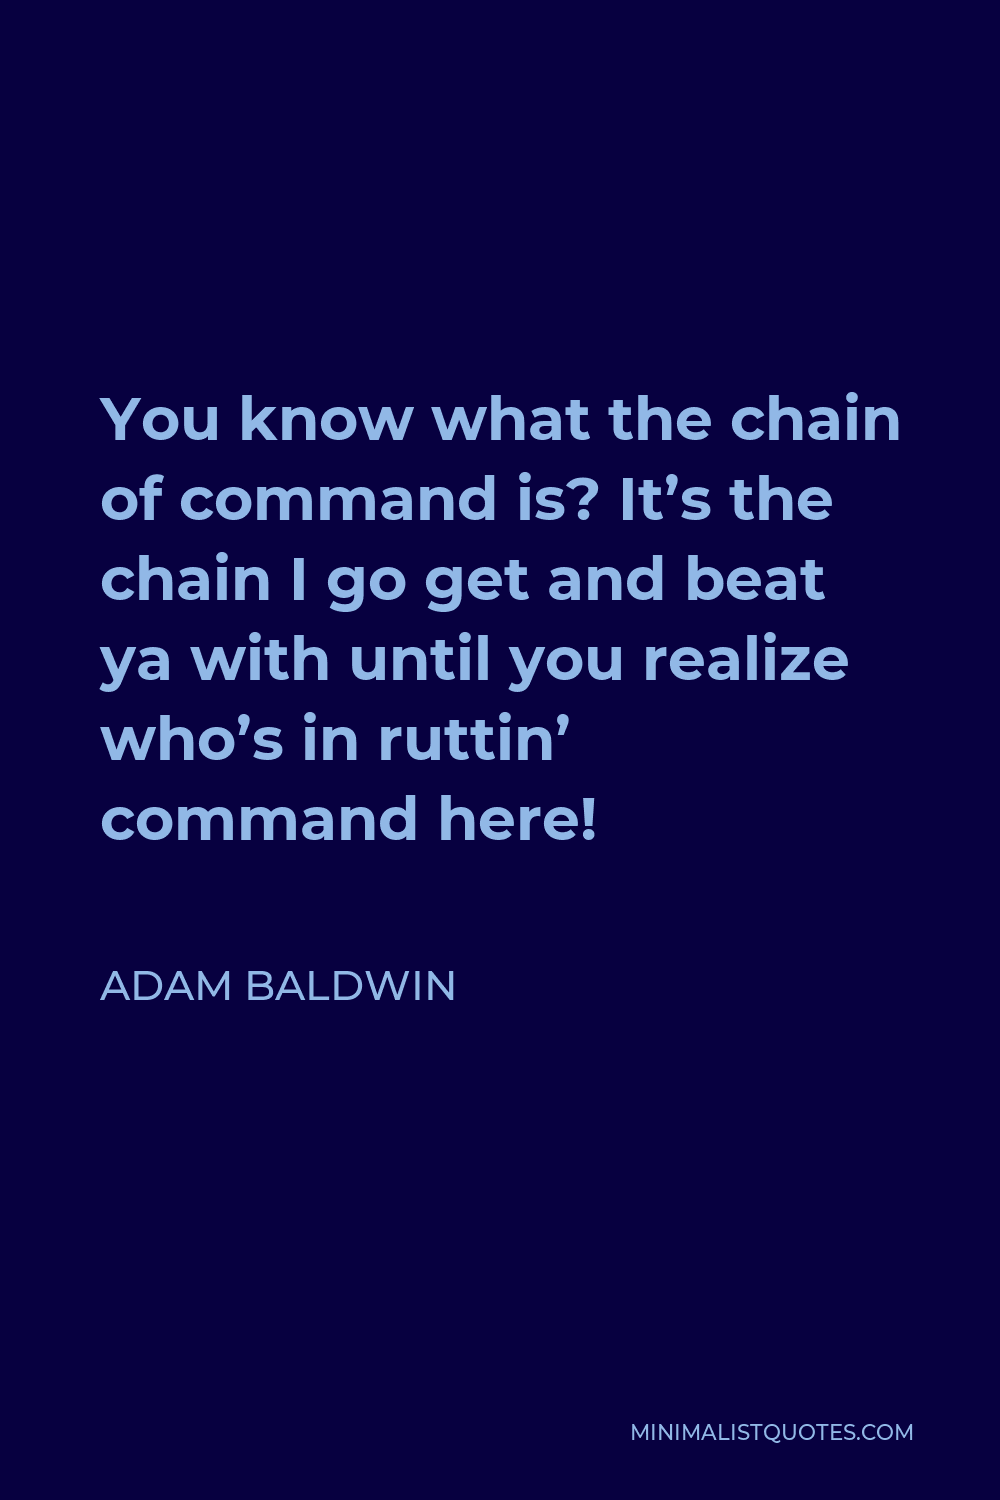 Adam Baldwin Quote - You know what the chain of command is? It’s the chain I go get and beat ya with until you realize who’s in ruttin’ command here!